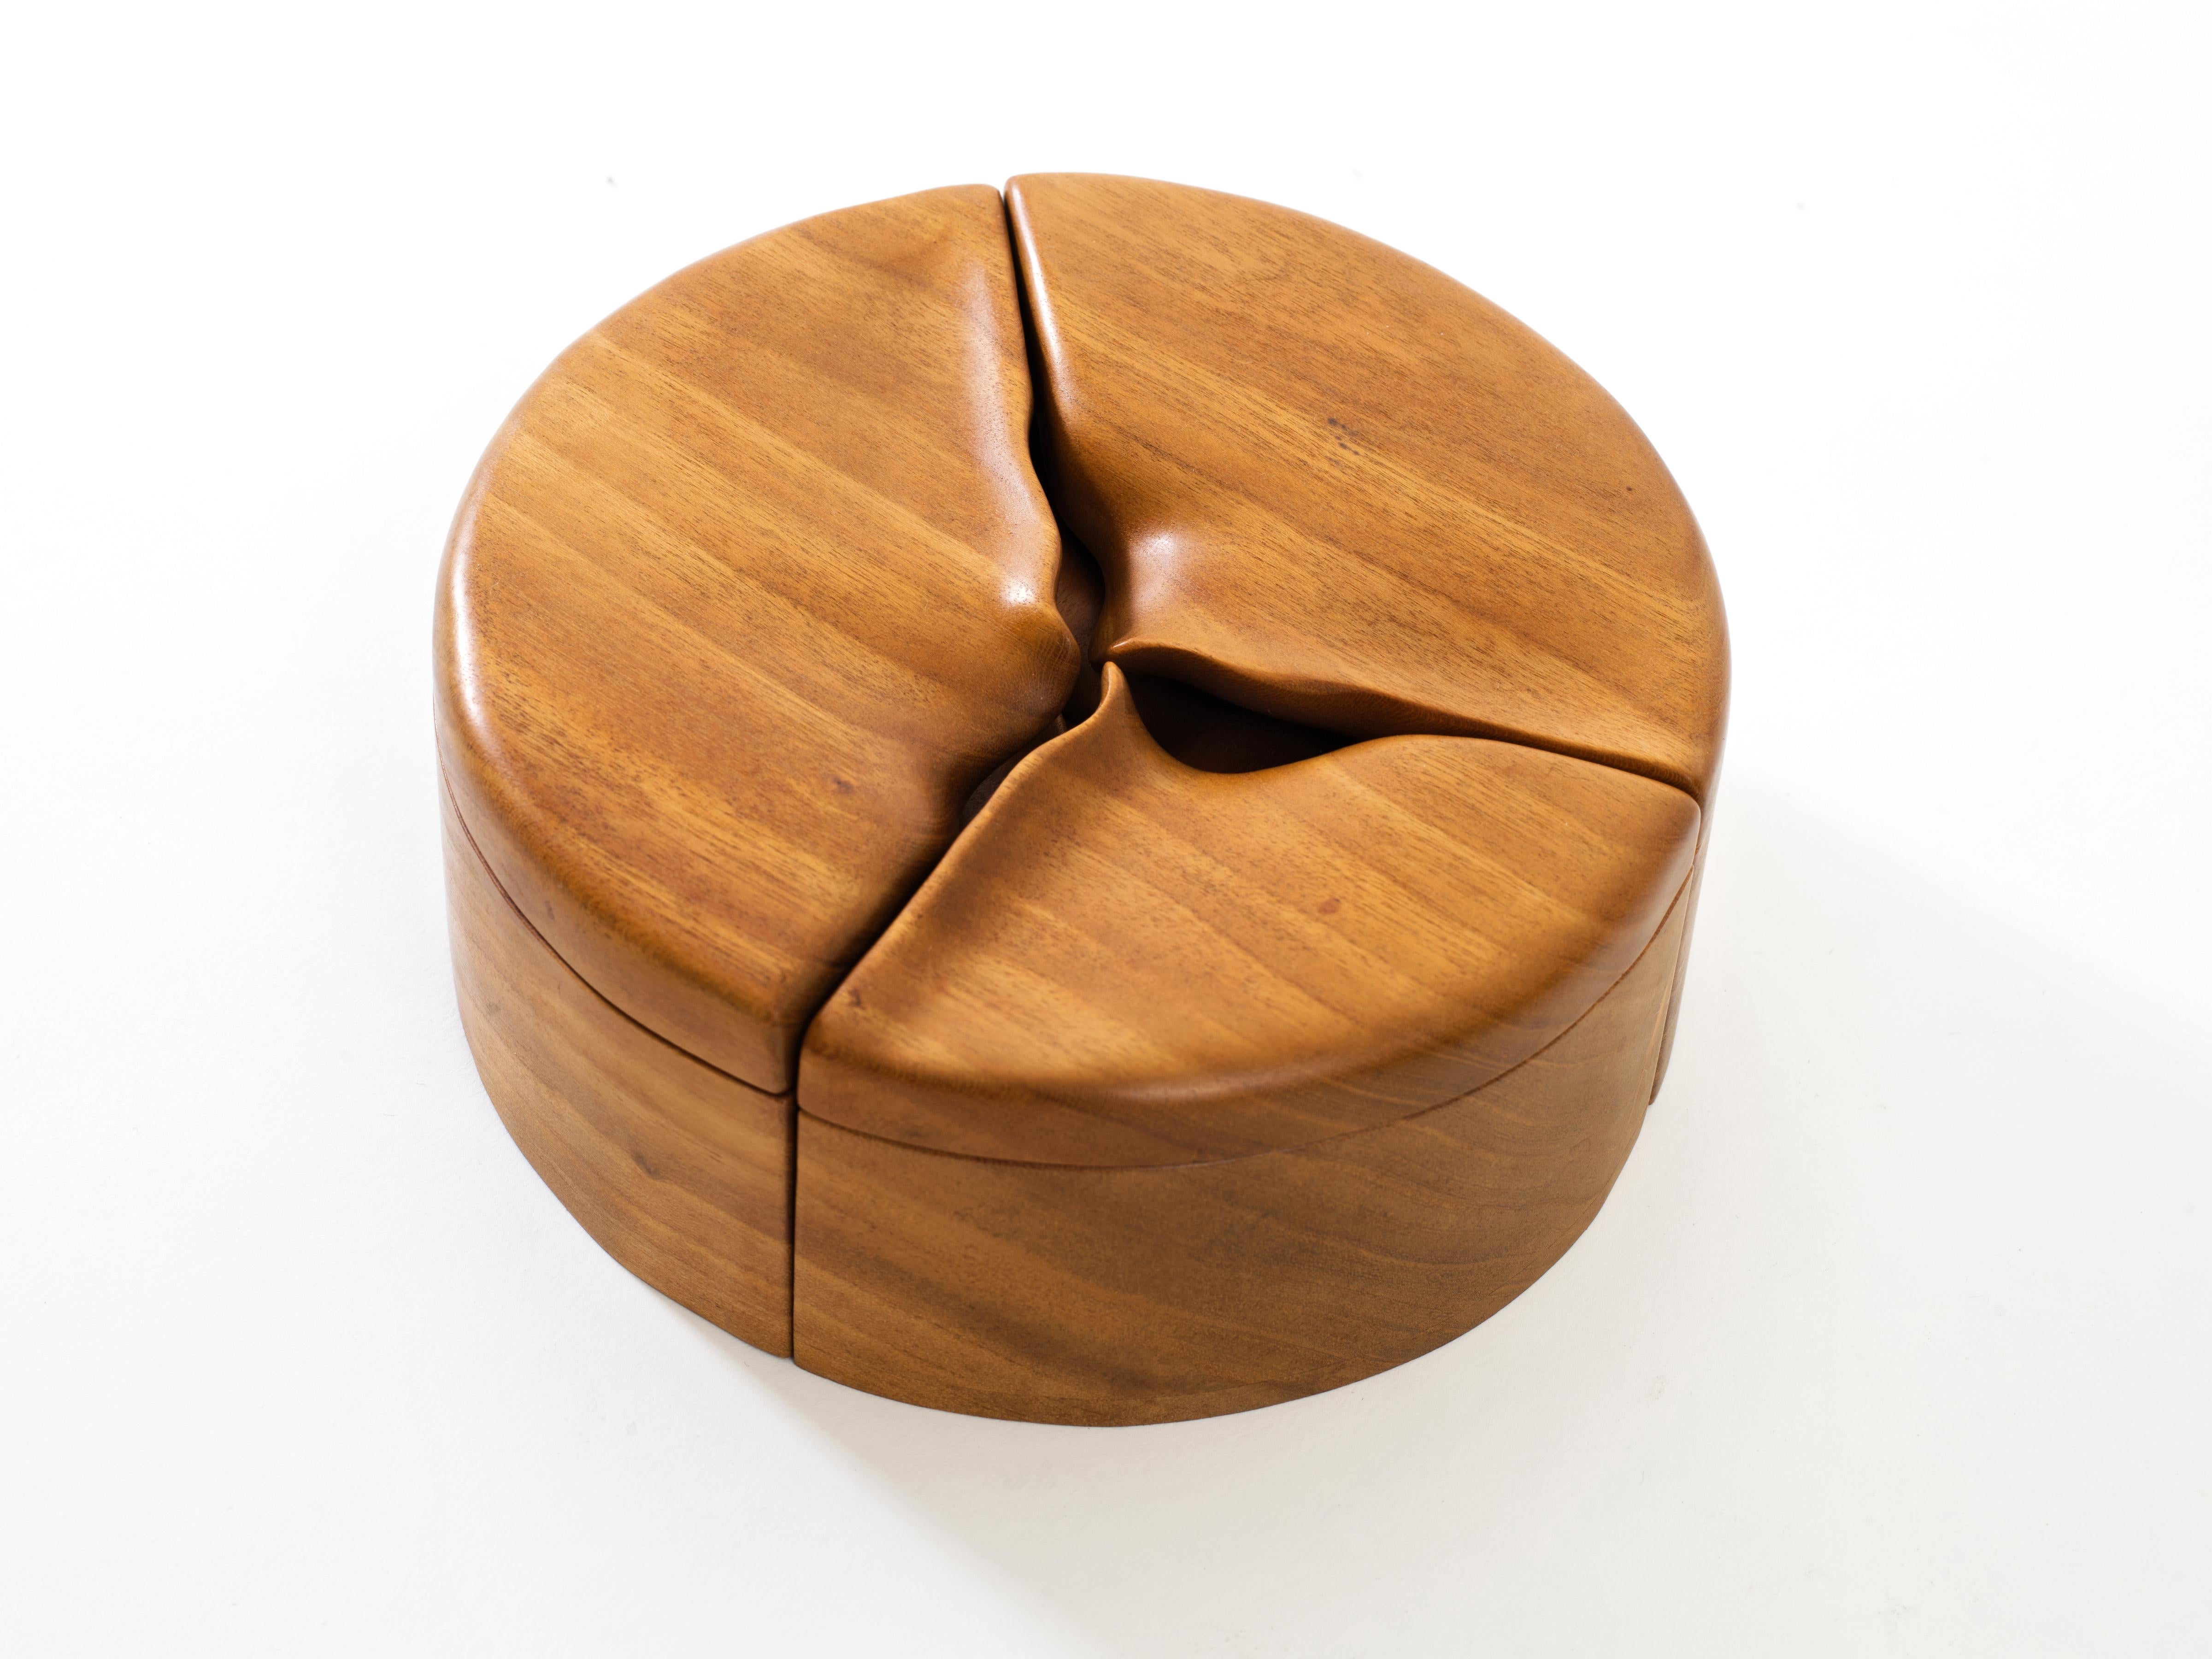 An alluring pair of handmade nesting boxes in contrasting finishes and with sensually carved lids, each separating into smaller components perfect for storing small objects such as jewelry. Beautifully crafted and tactile desktop or tabletop